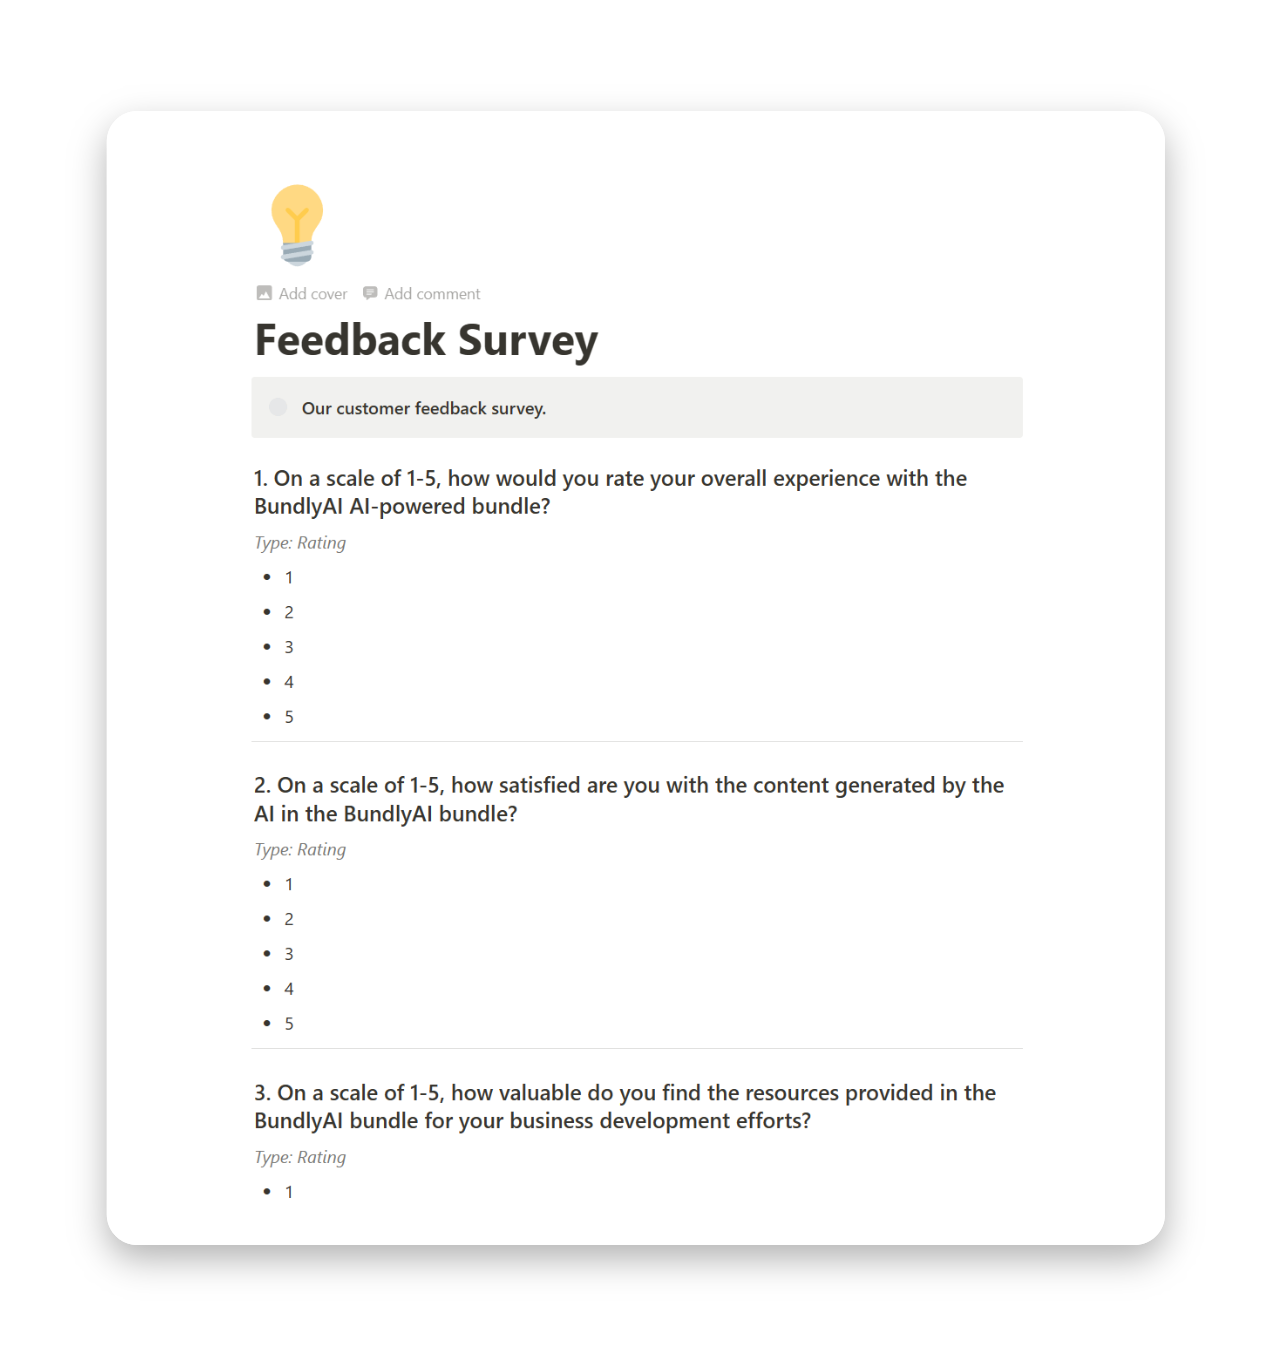 A screenshot of the 'Feedback Survey' page on BundlyAI, showcasing a customizable feedback survey to collect valuable customer insights.